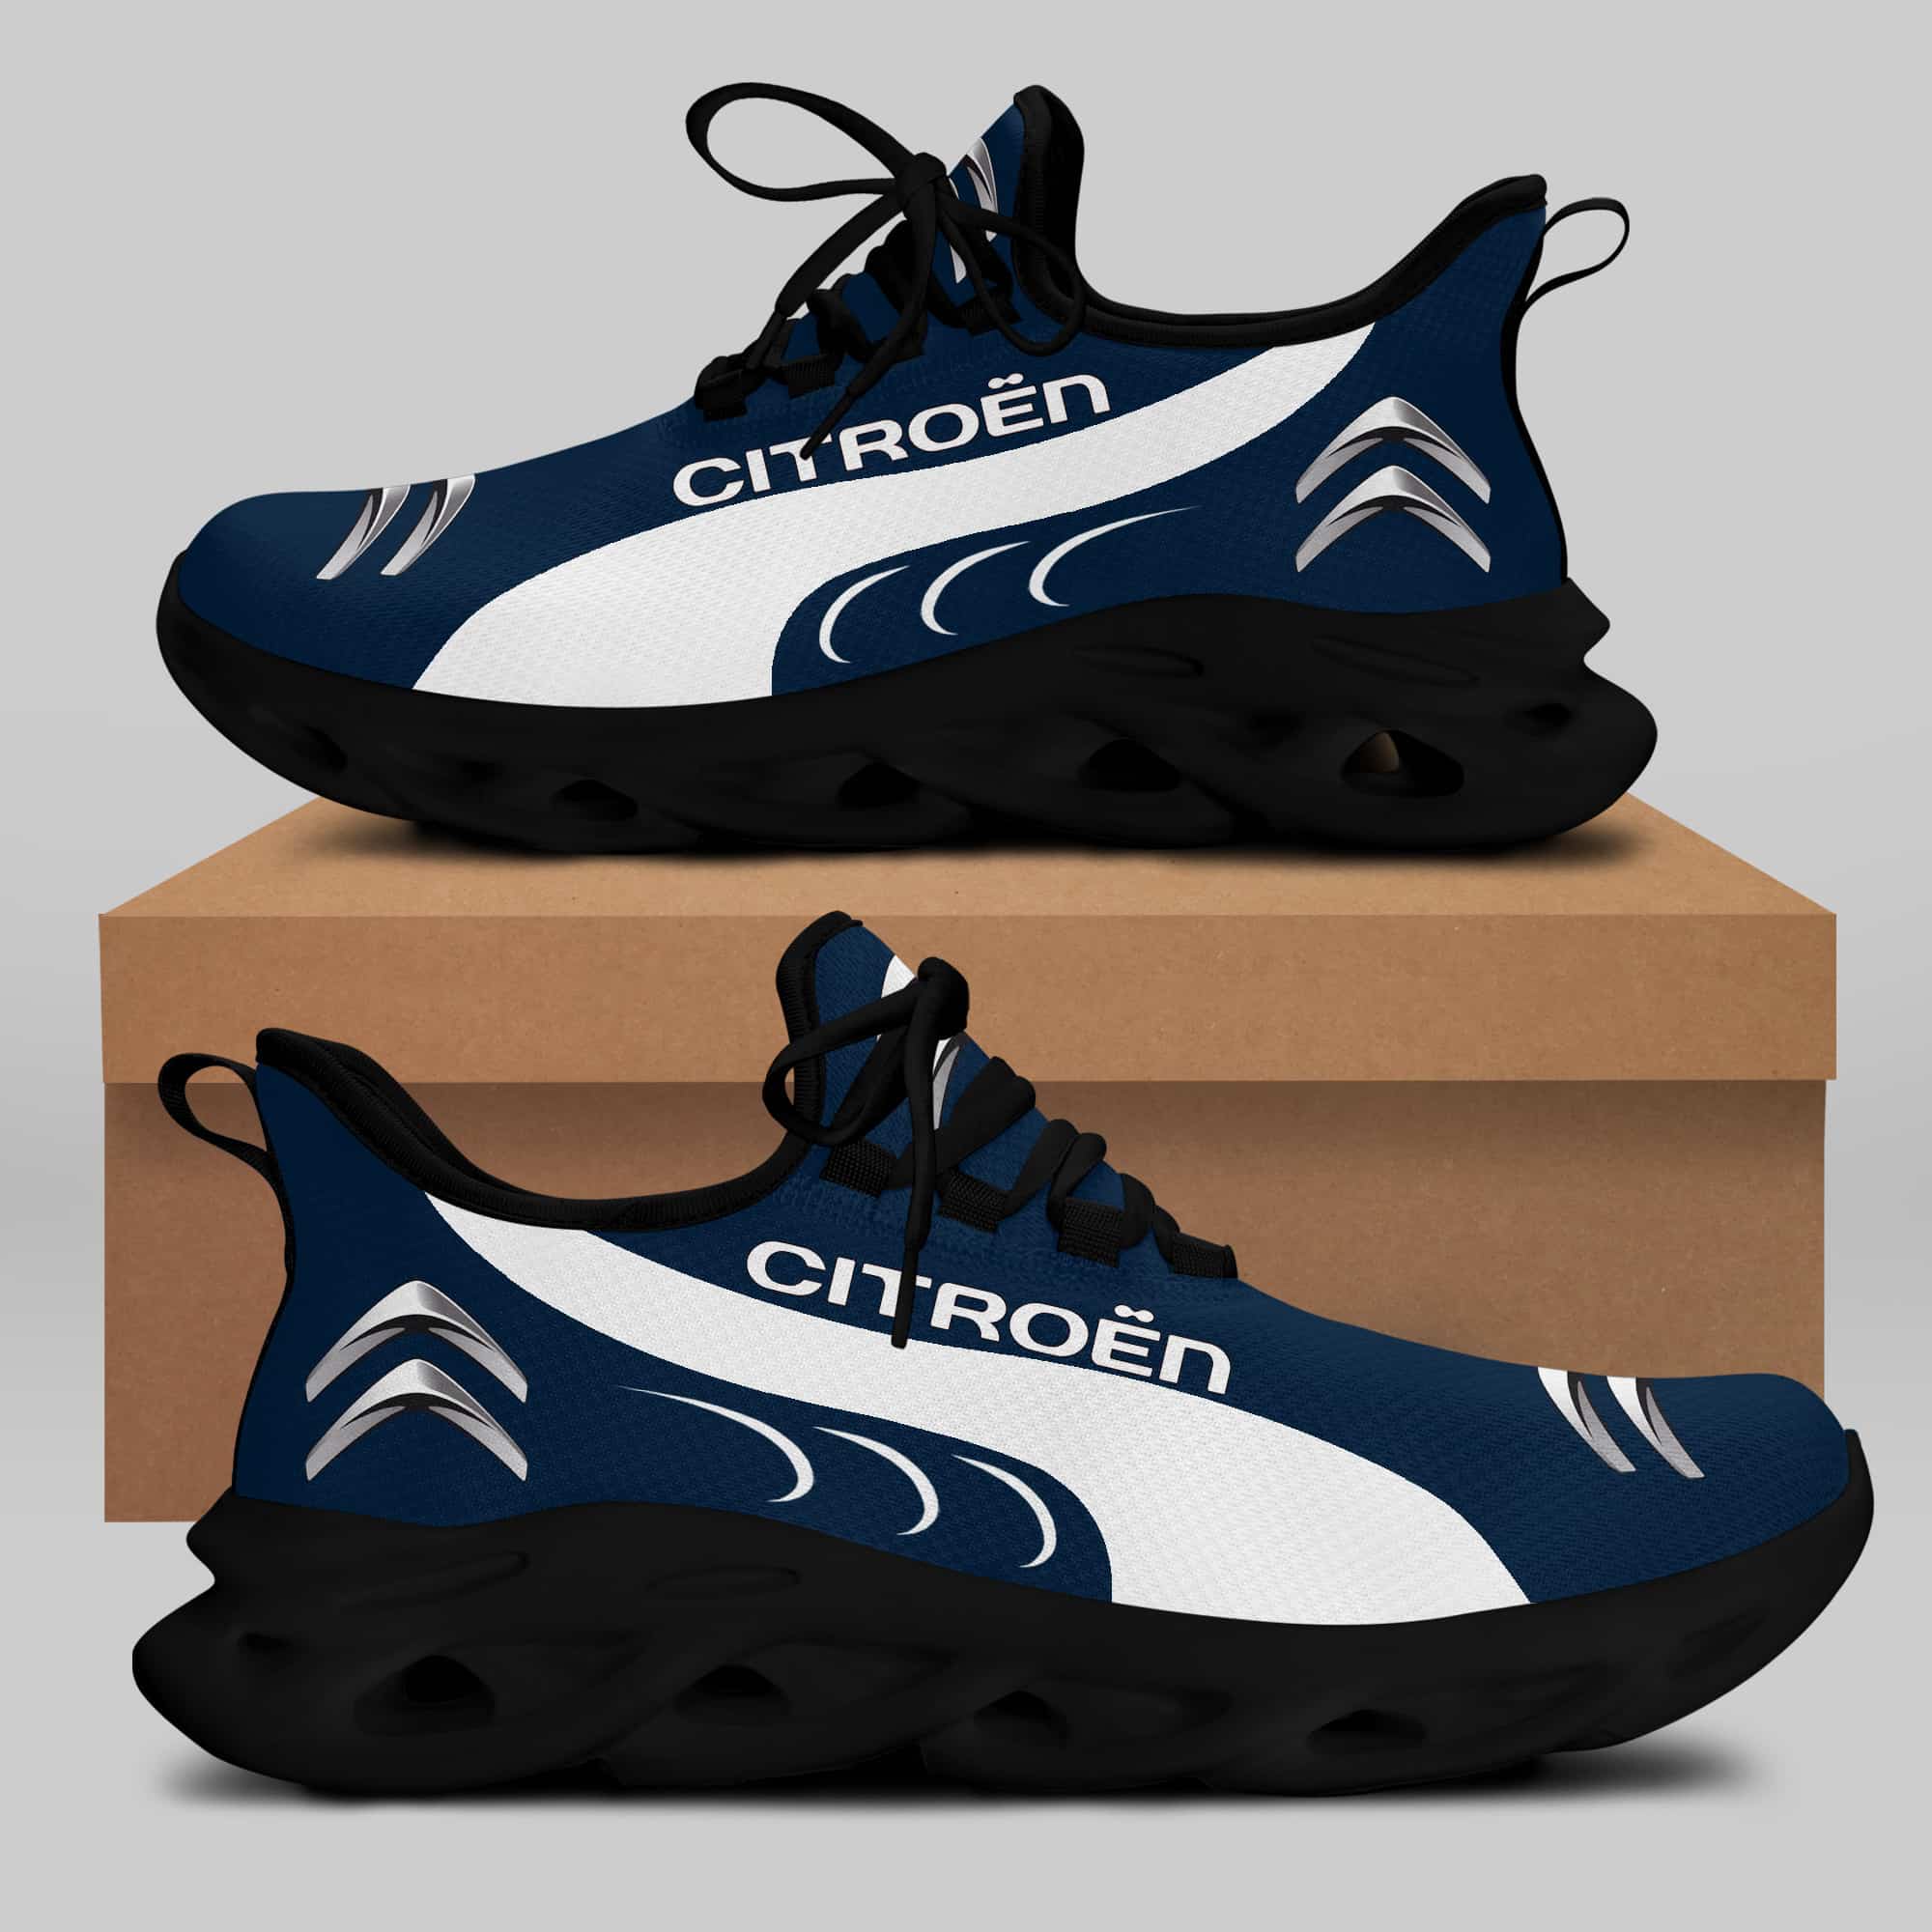 Citroën Running Shoes Max Soul Shoes Sneakers Ver 7 1